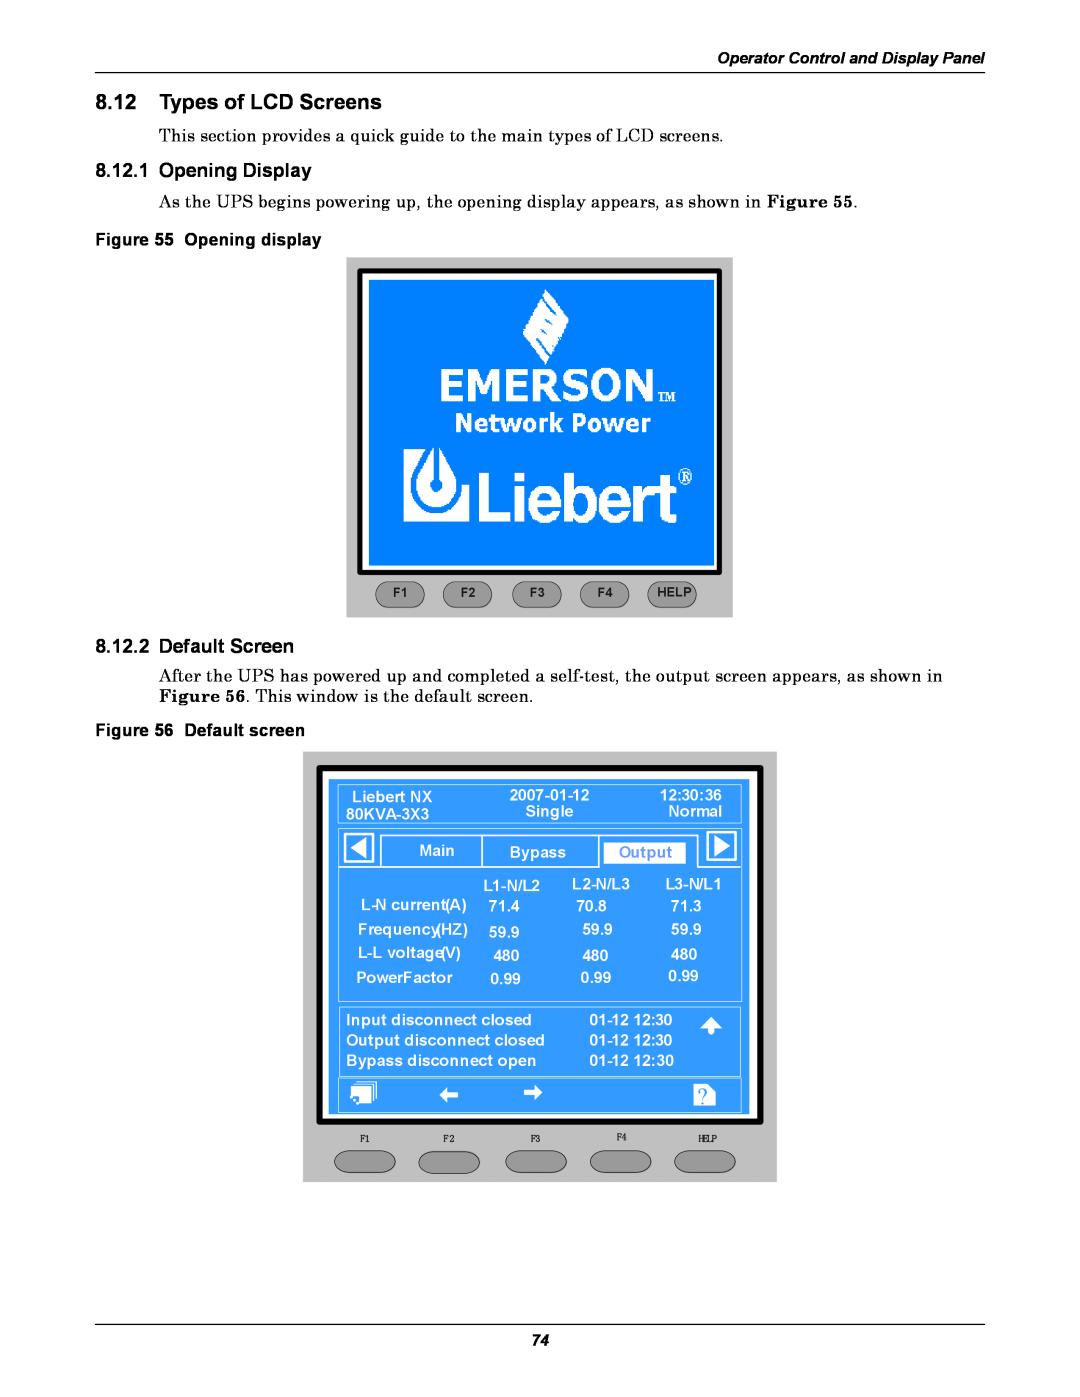 Emerson 60HZ, 480V 8.12Types of LCD Screens, 8.12.1Opening Display, 8.12.2Default Screen, Opening display, Default screen 